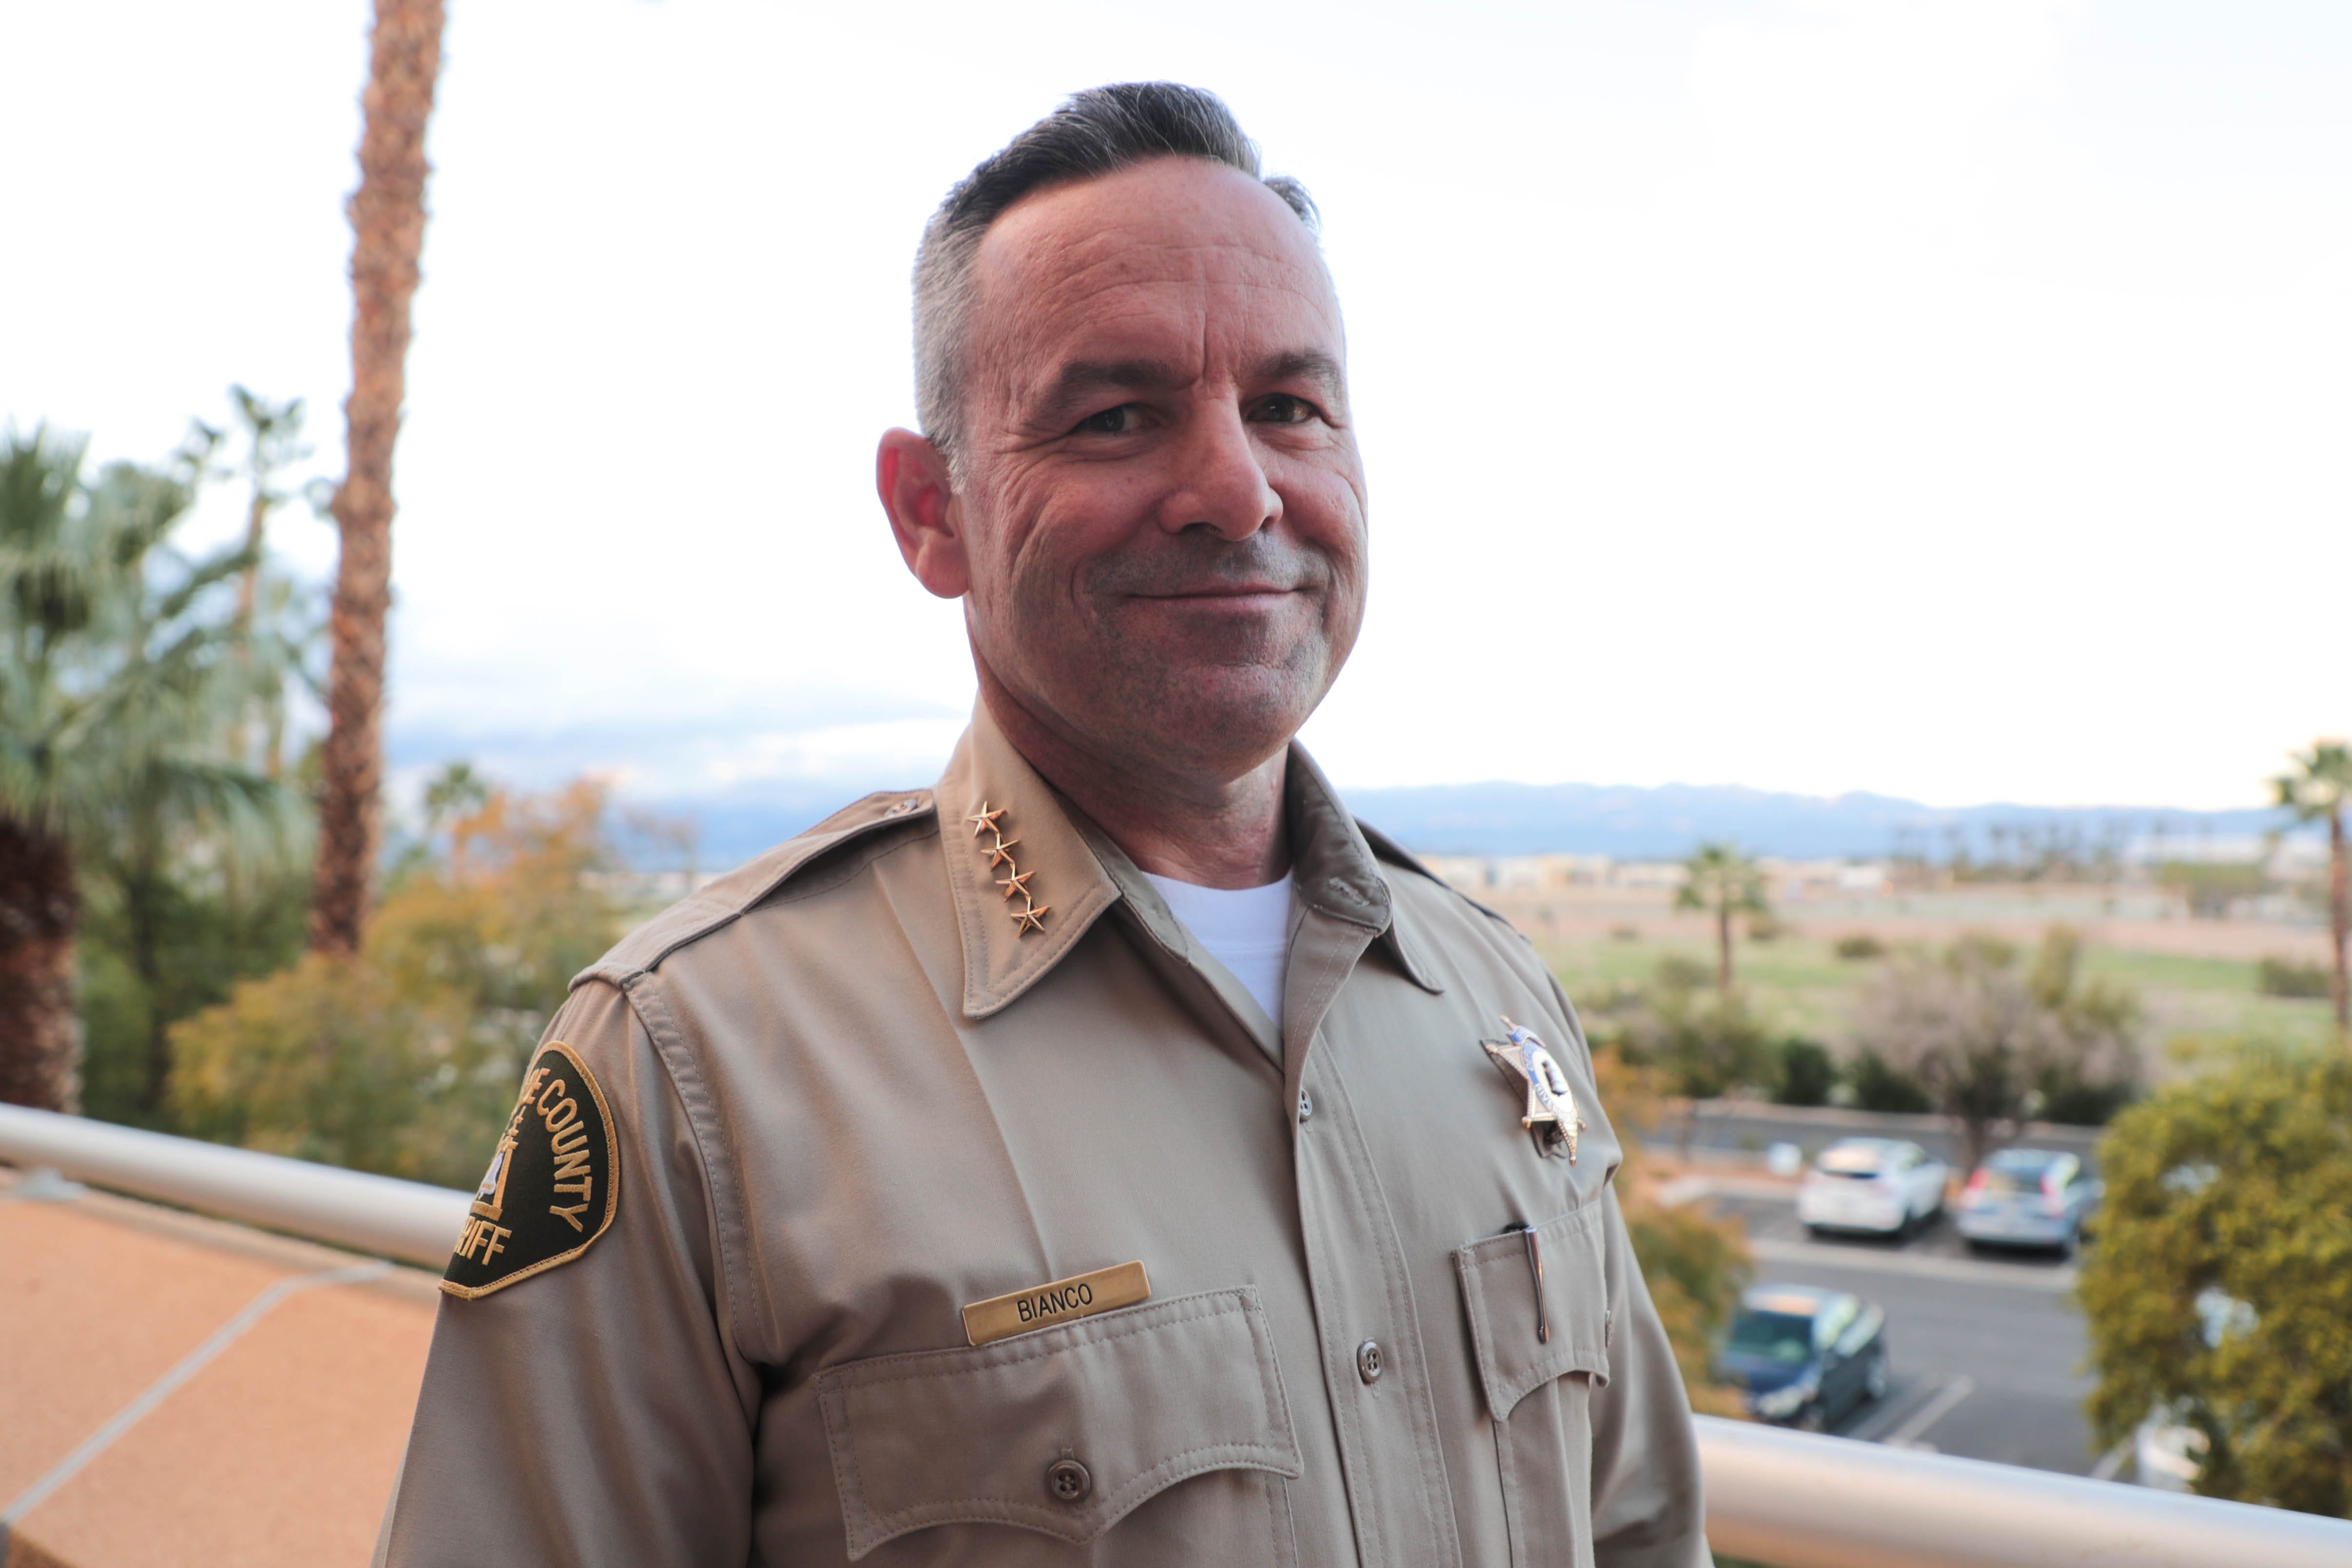 County Sheriff Chad defends his past Oath Keeper membership some call for his resignation